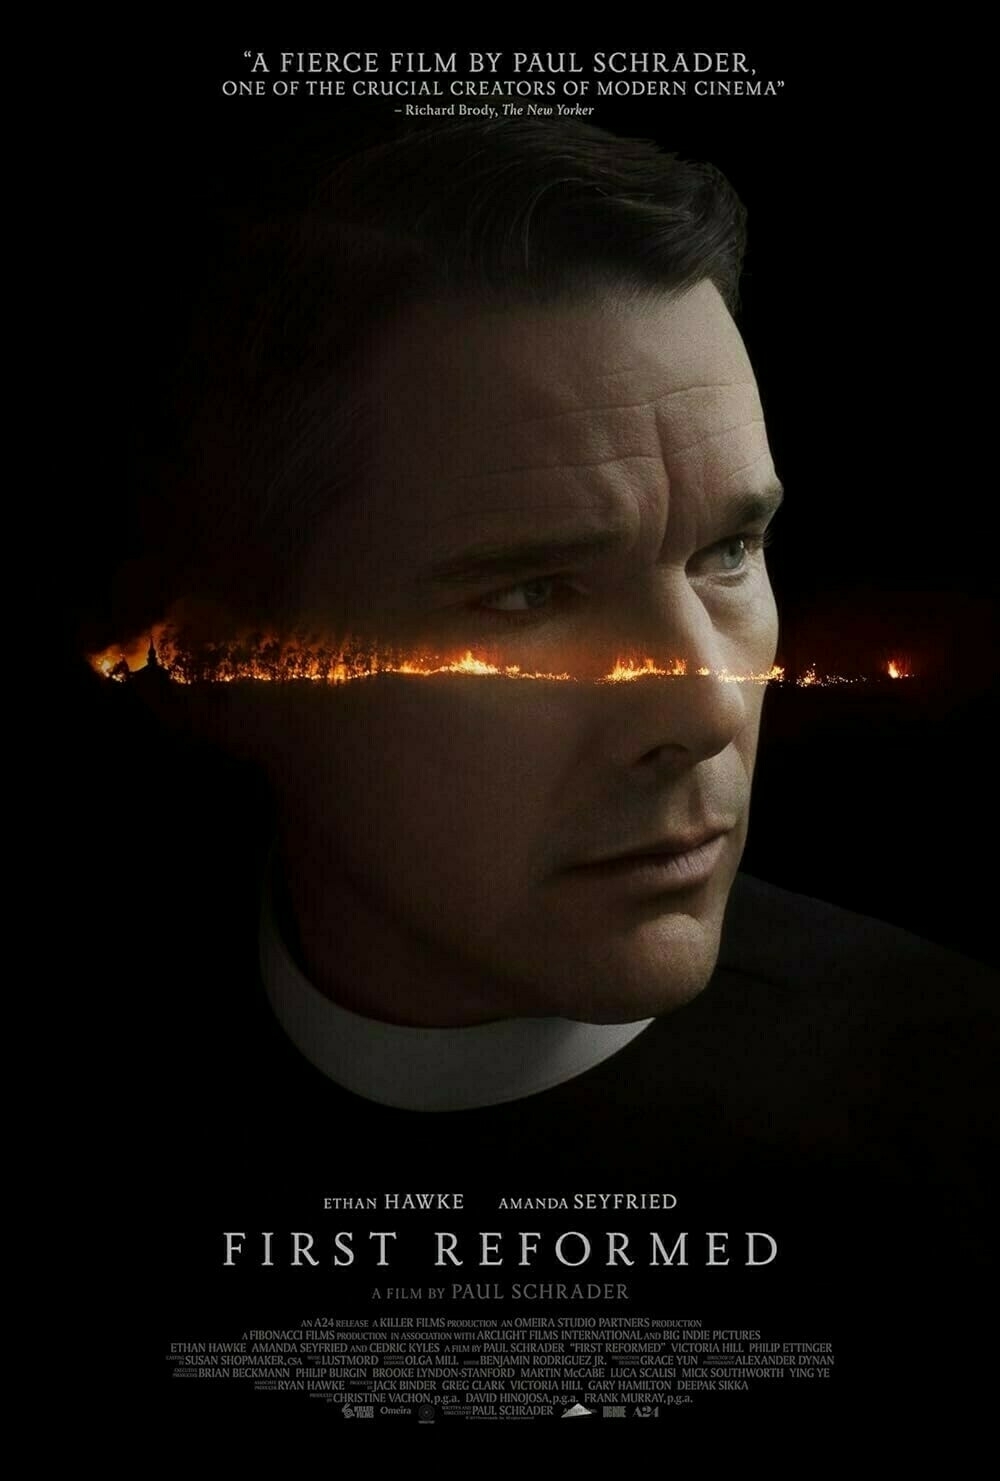 Poster for the film "First Reformed"